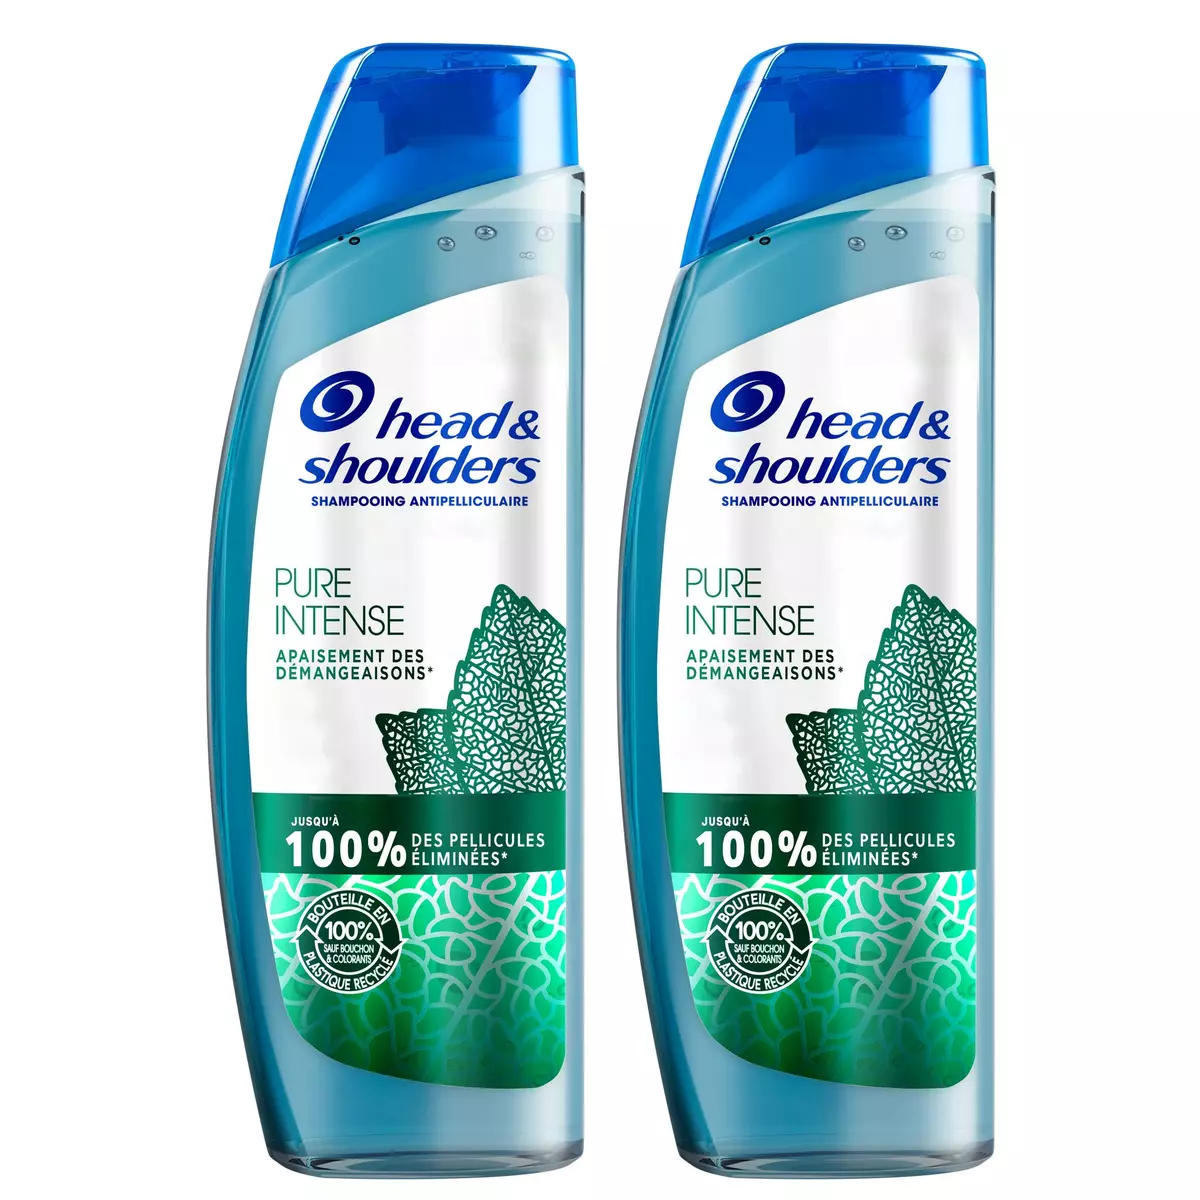 HEAD & SHOULDERS Shampooing antipelliculaire pure intense 2x250ml